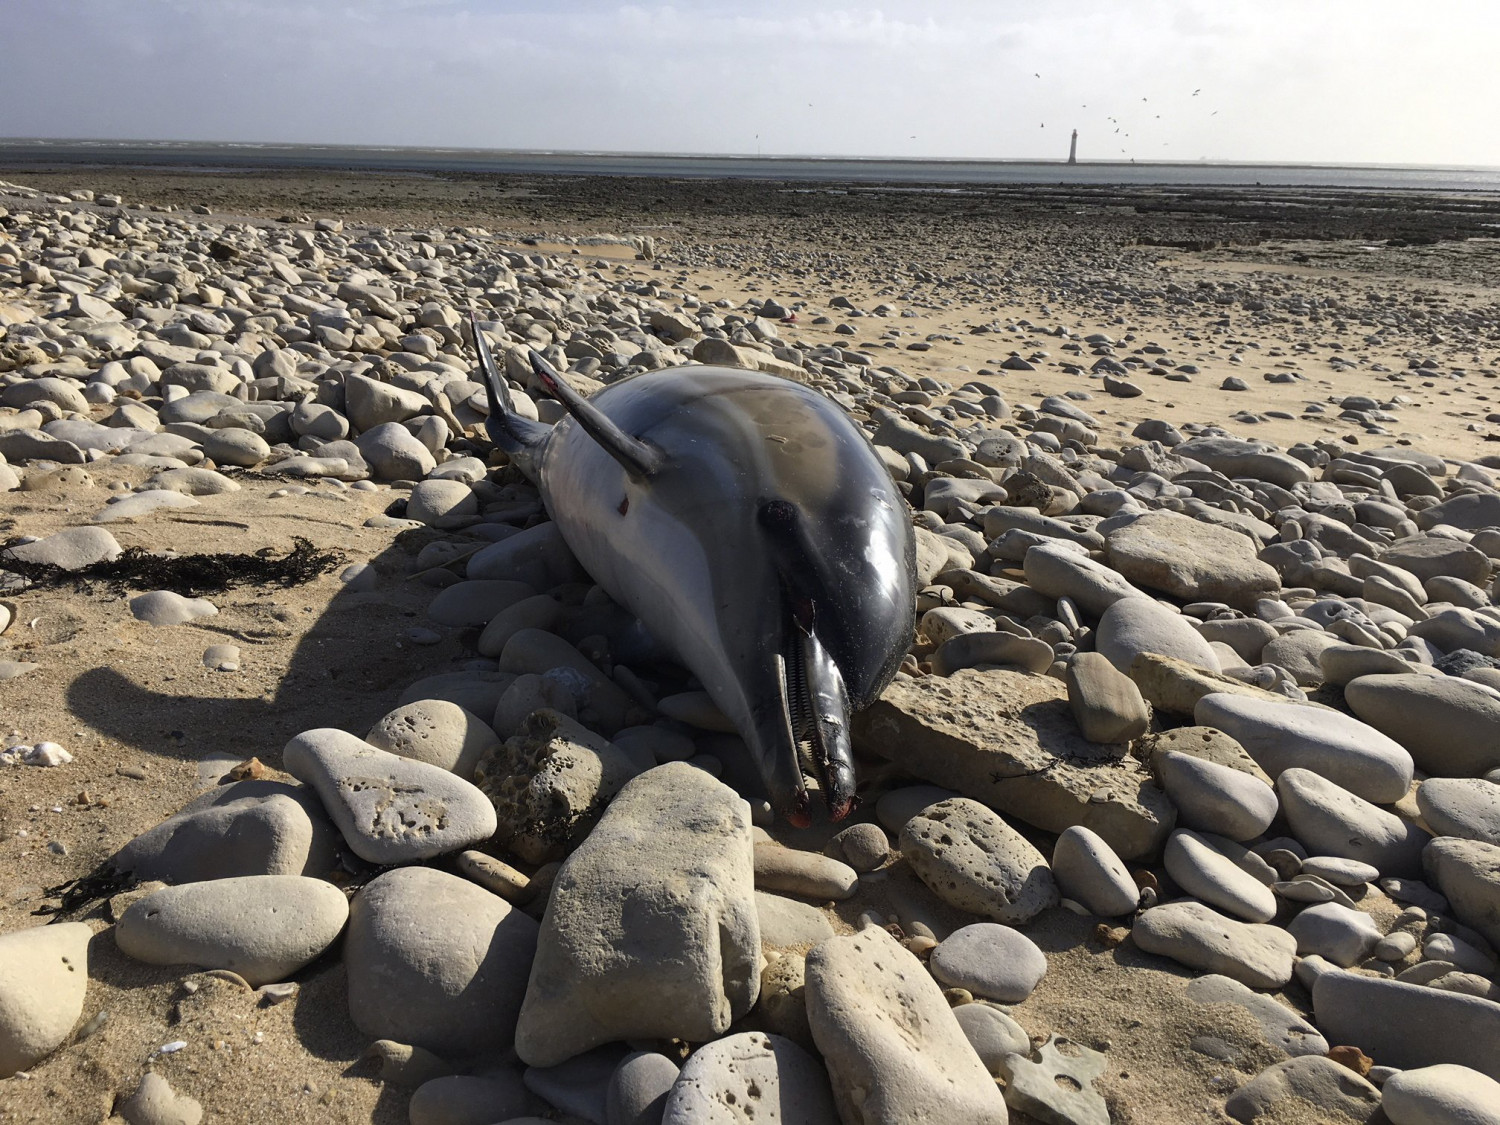 Biologists Find Trash in Belly of Stranded Baby Dolphin